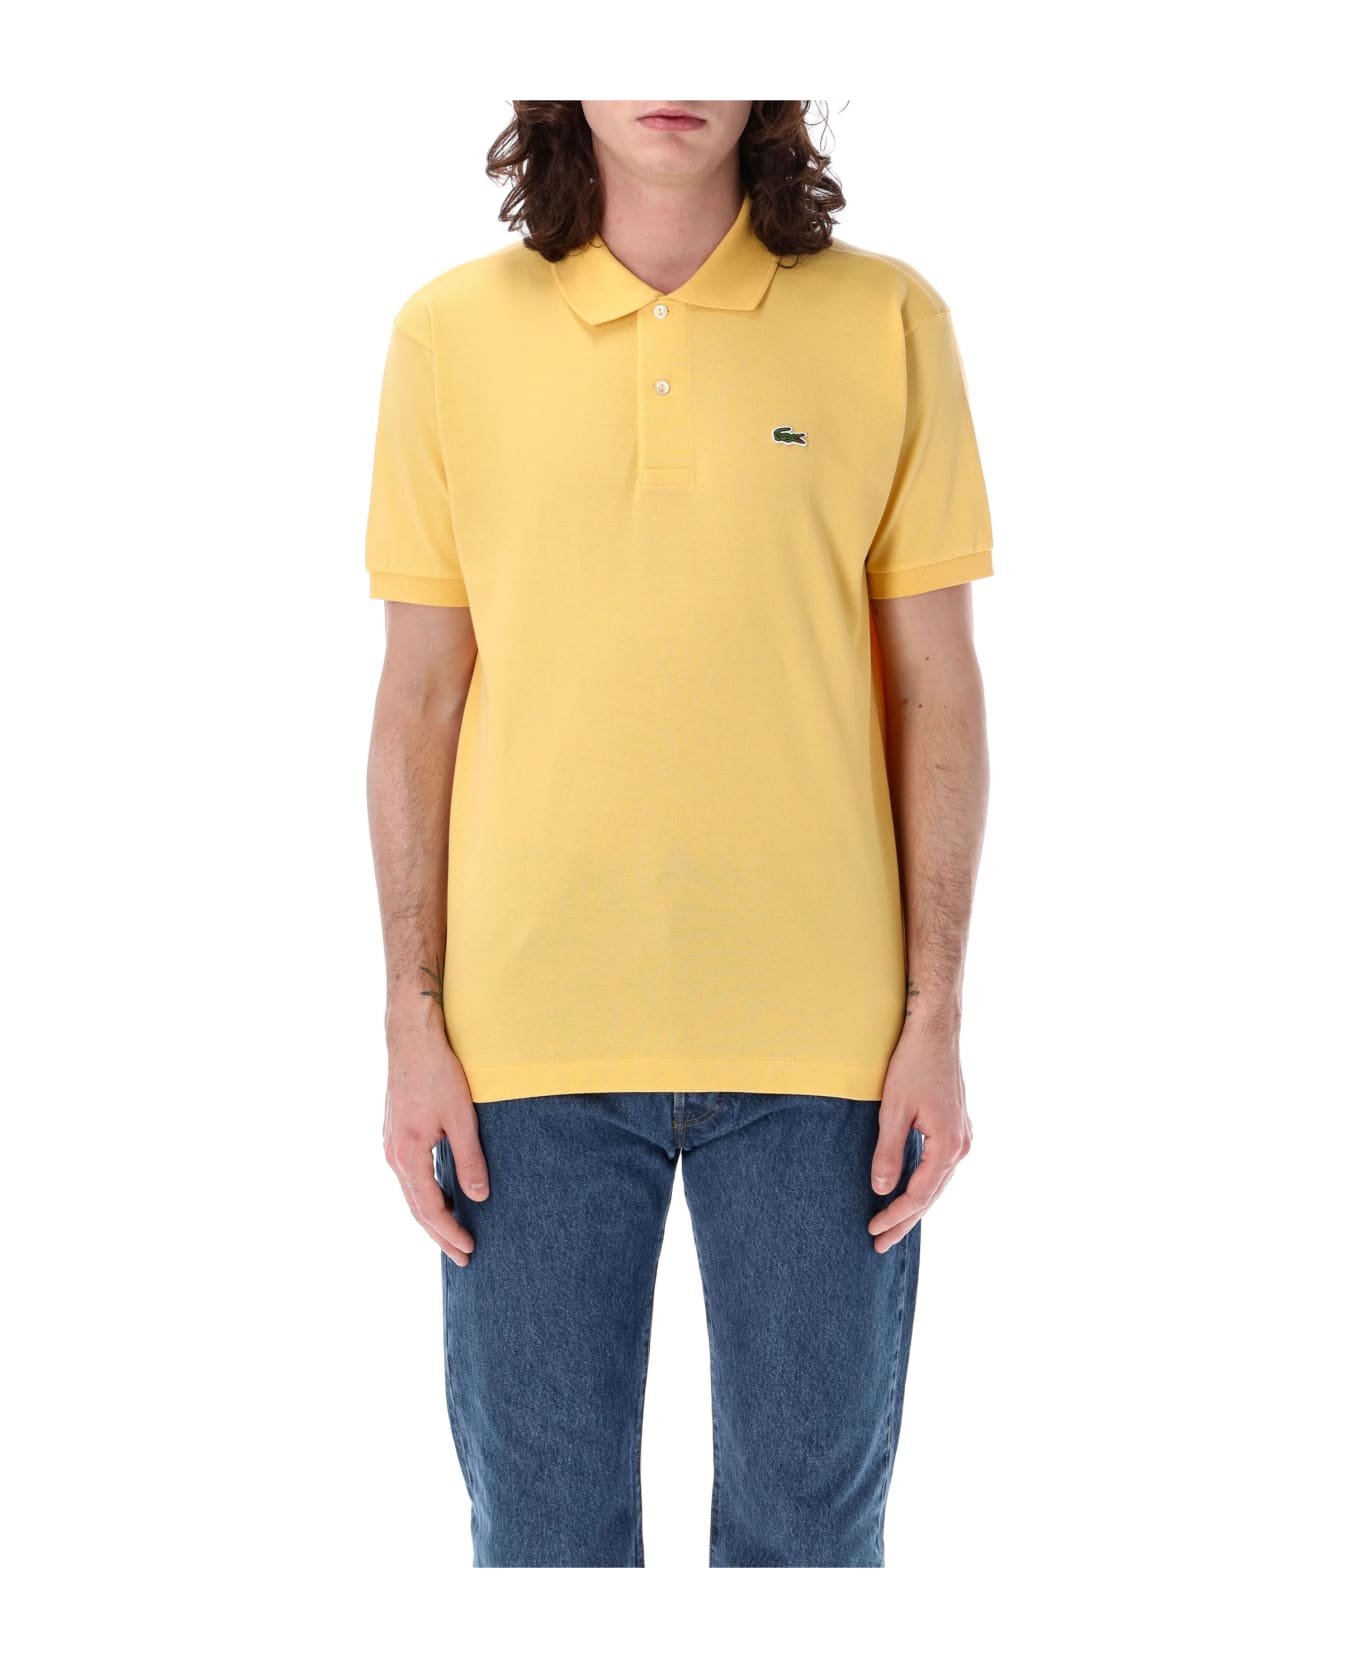 Lacoste Classic Fit Polo Shirt - YELLOW ポロシャツ